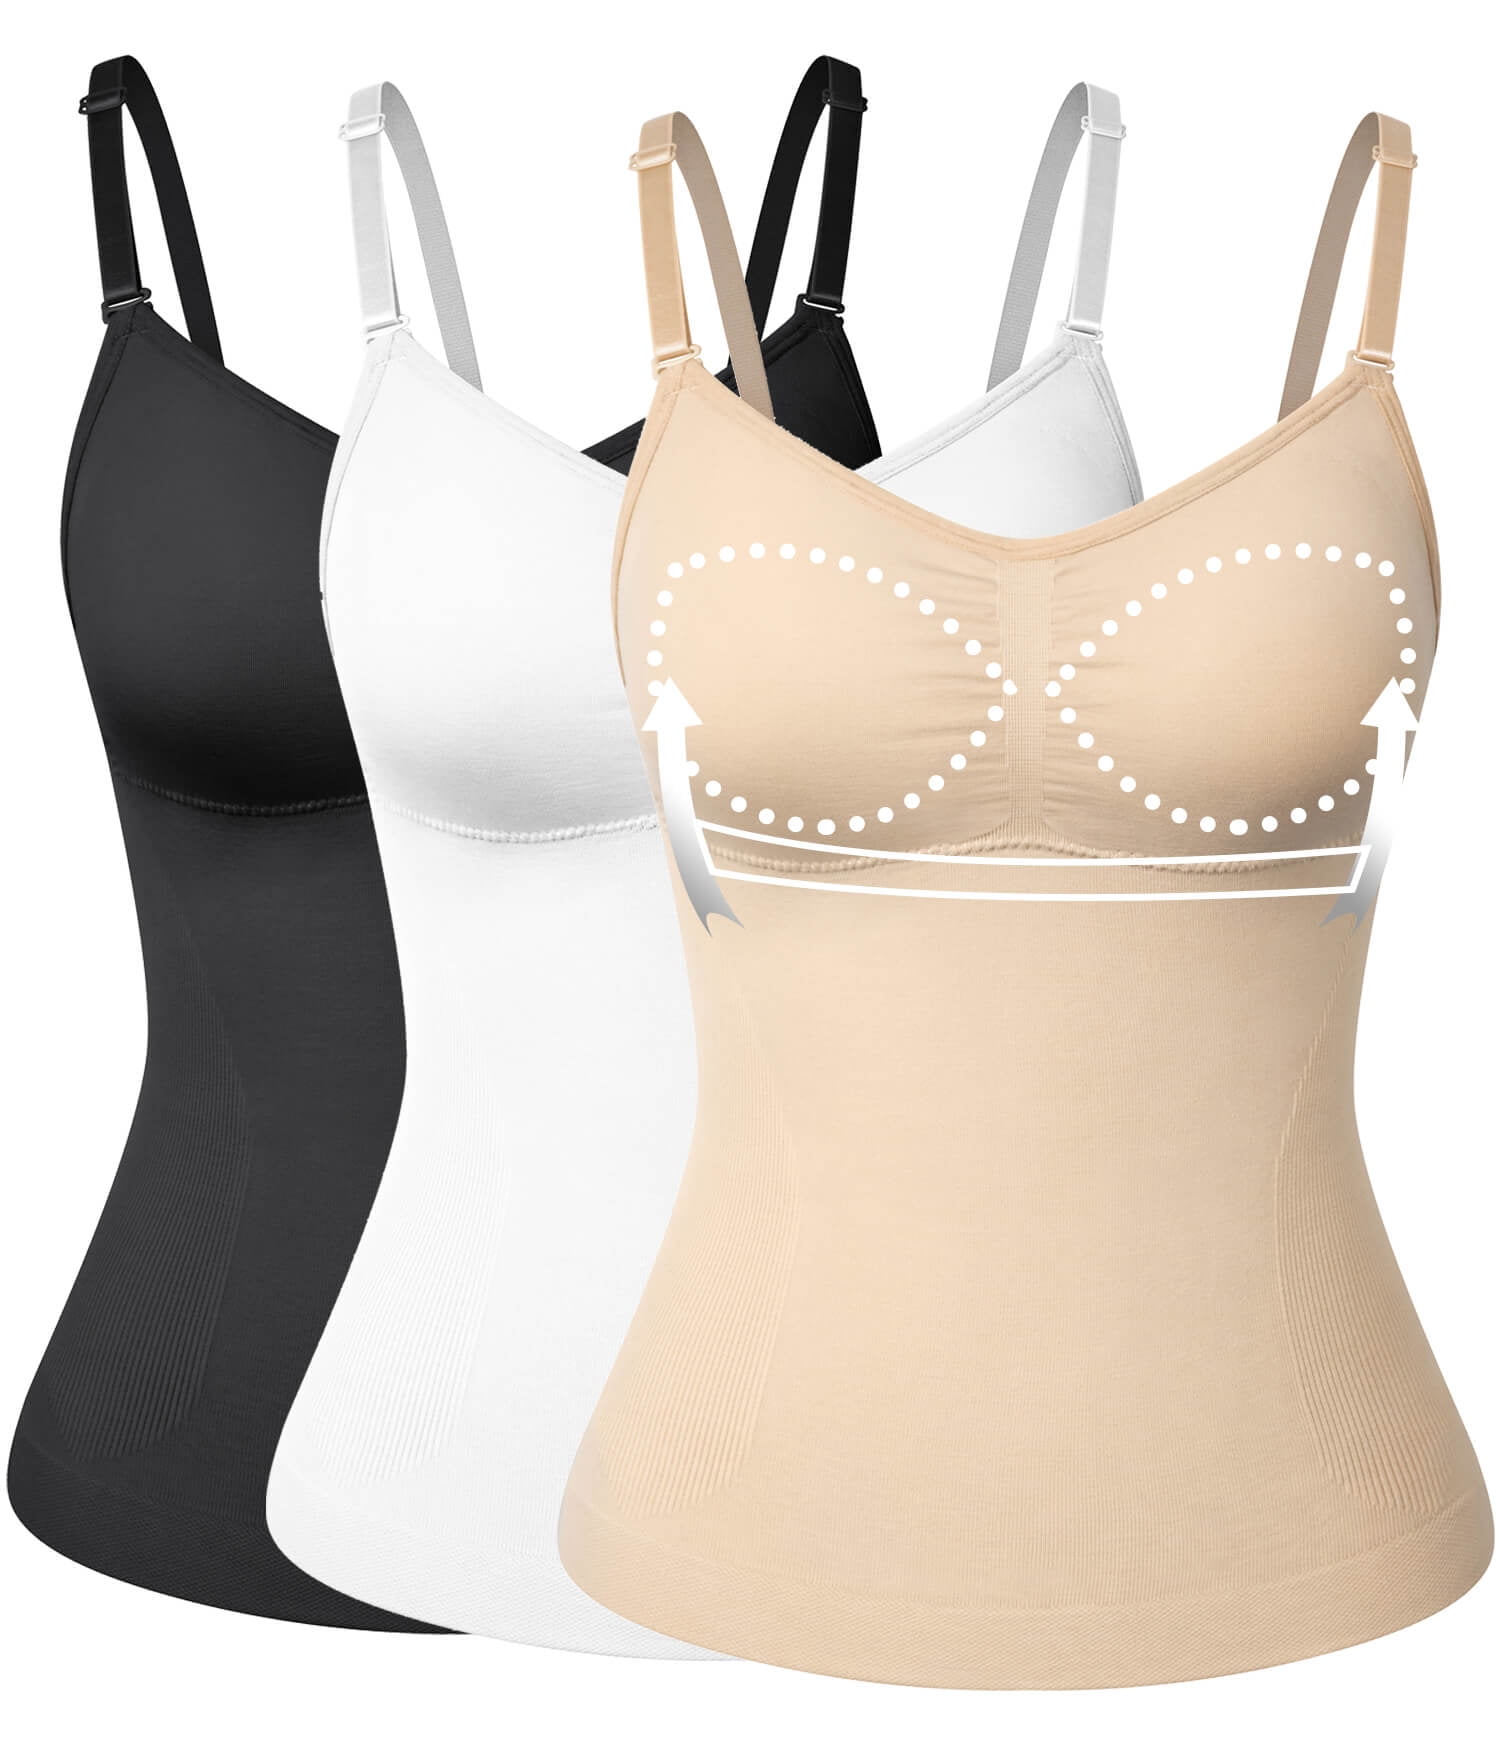 2 Packs Shapewear Camisoles with Built in Padded Bras Tummy